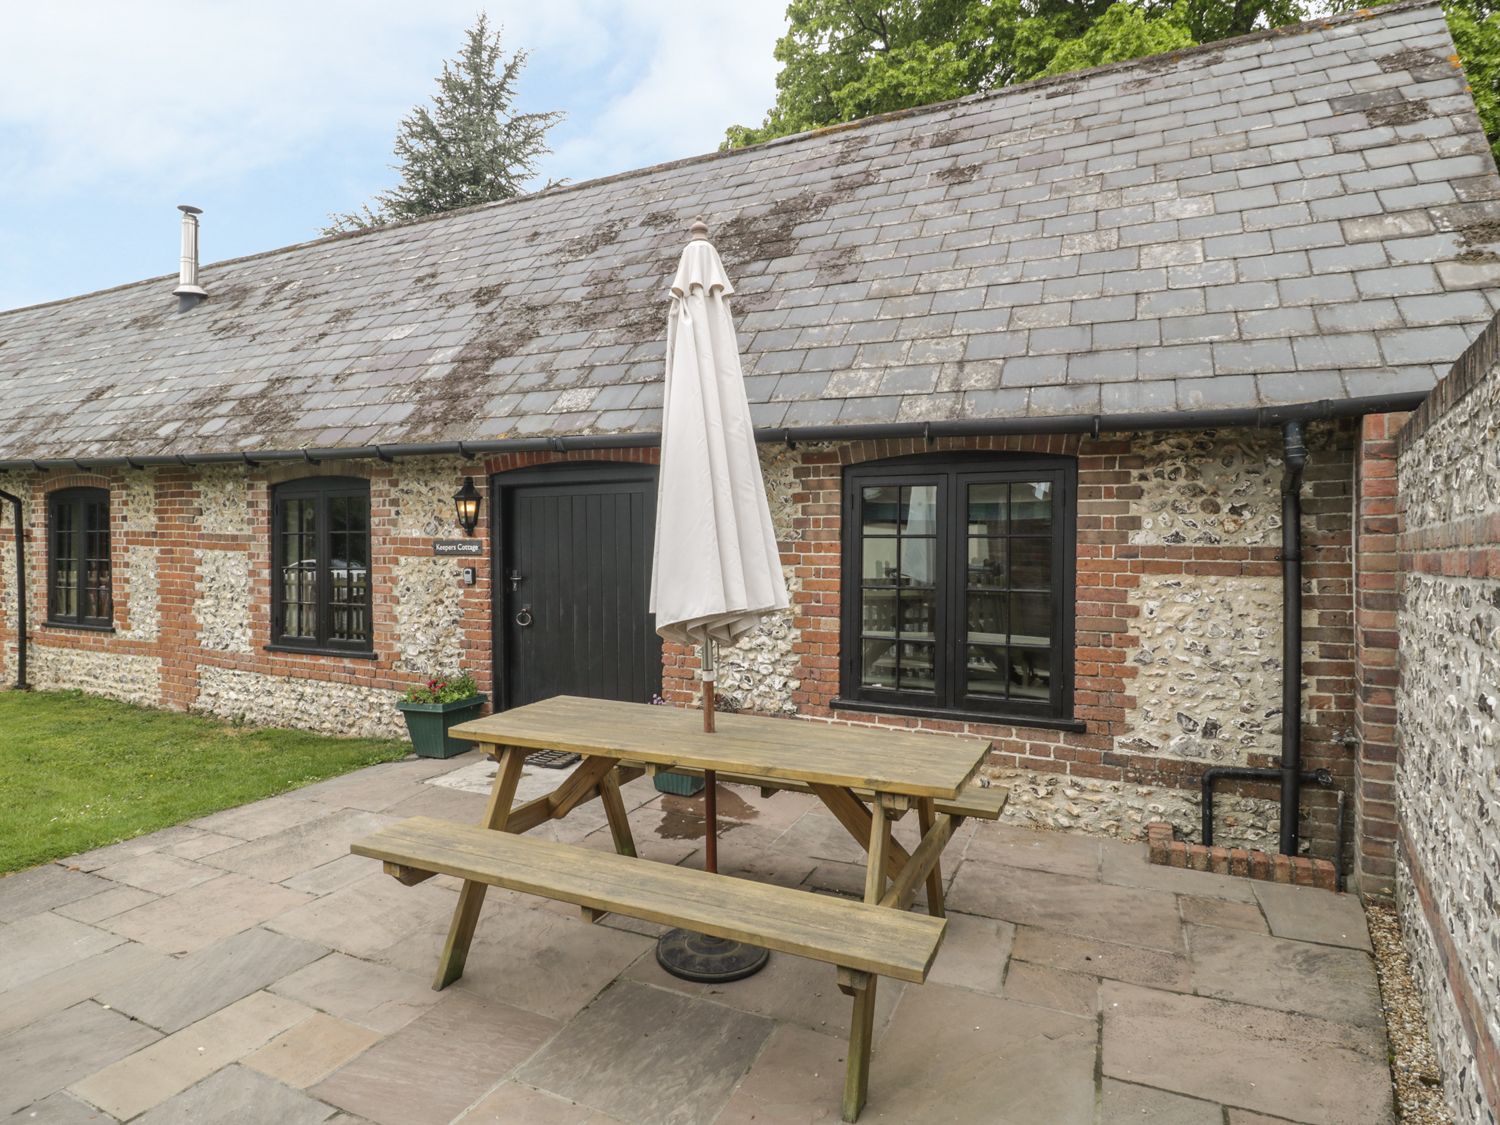 Keepers Cottage - Dorset - 905895 - photo 1